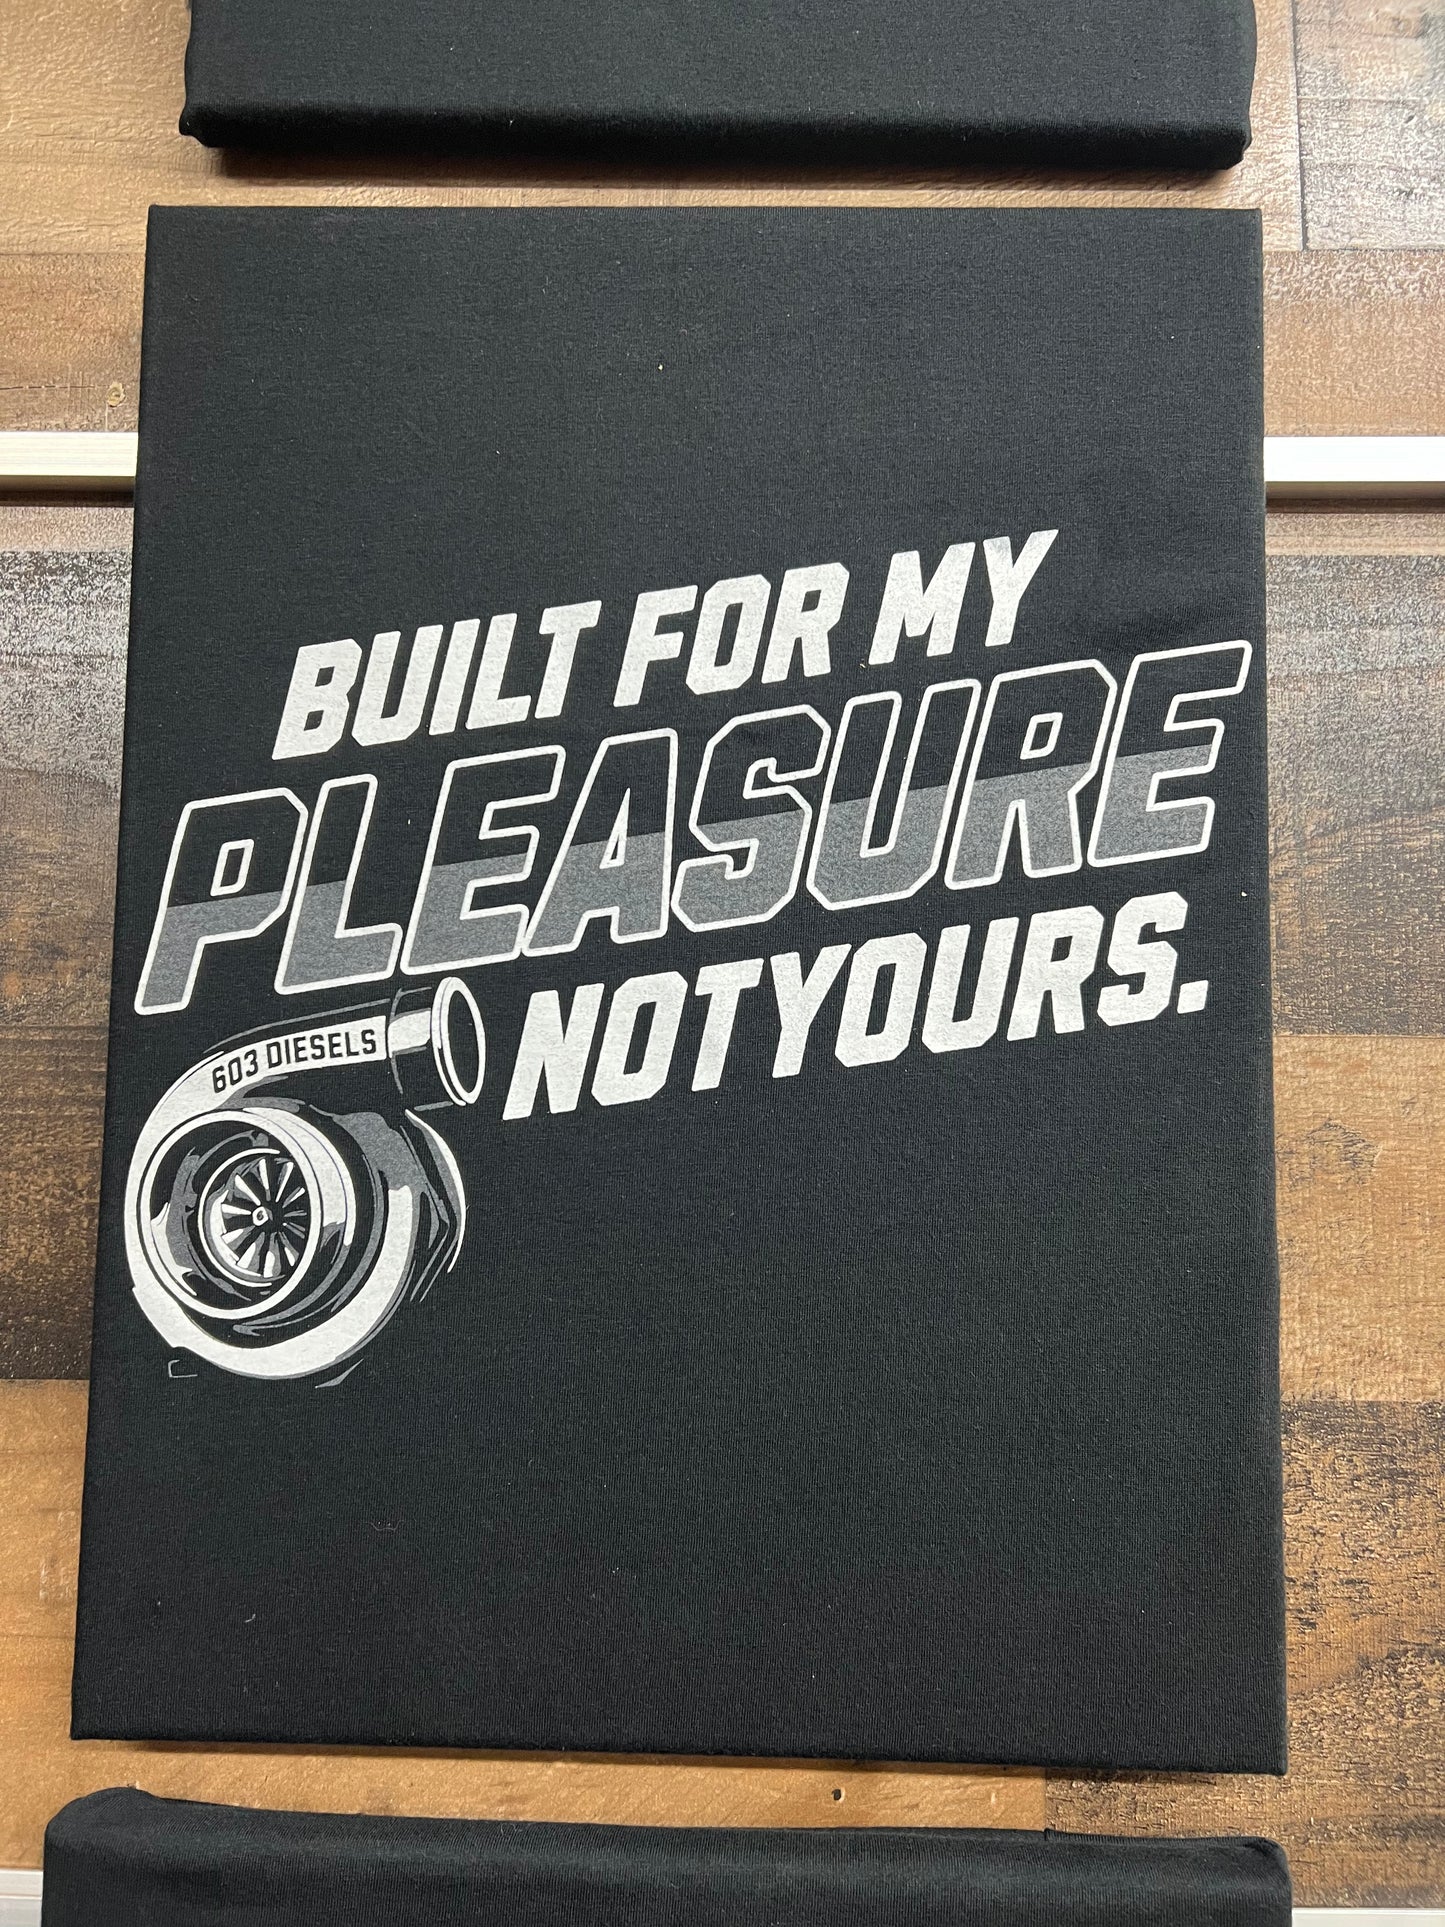 Built For My Pleasure Not Yours Tshirt